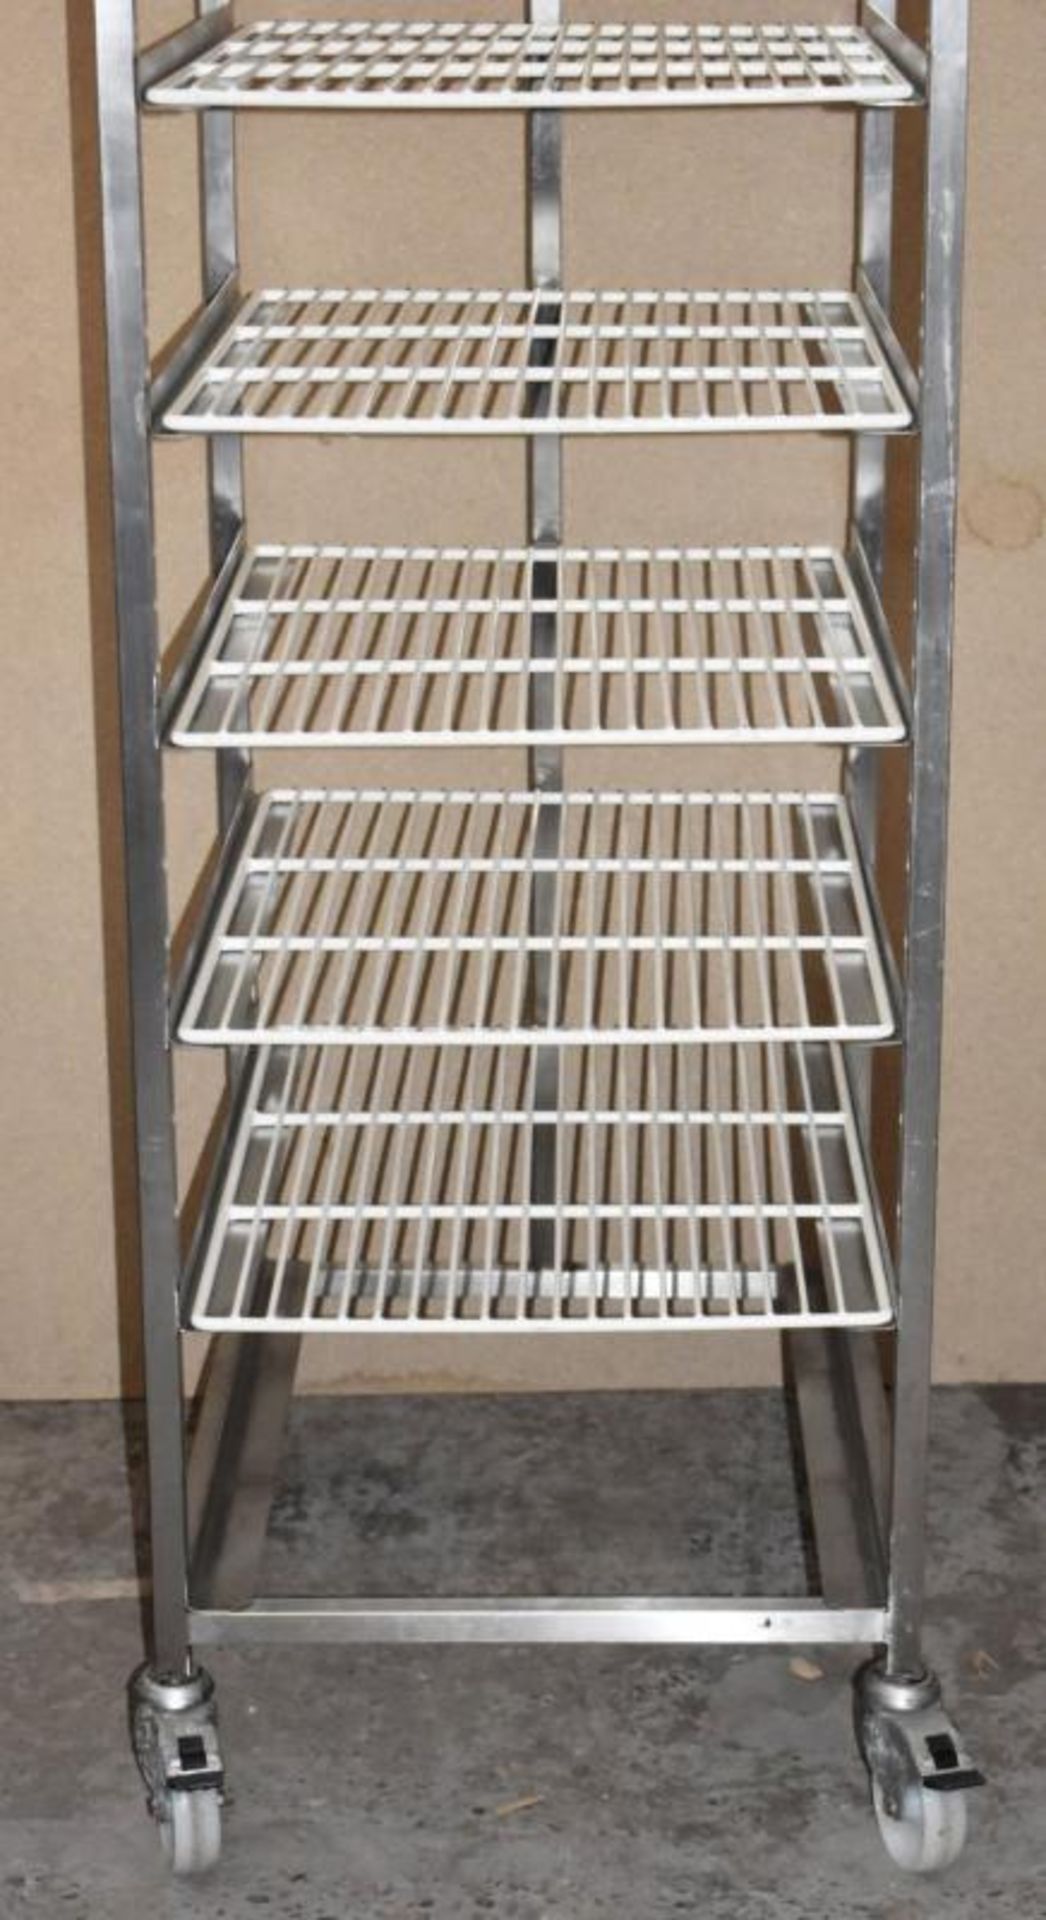 1 x Stainless Steel 8 Tier Mobile Shelf Unit For Commercial Kitchens With White Coated Wire Shelves - Image 7 of 11